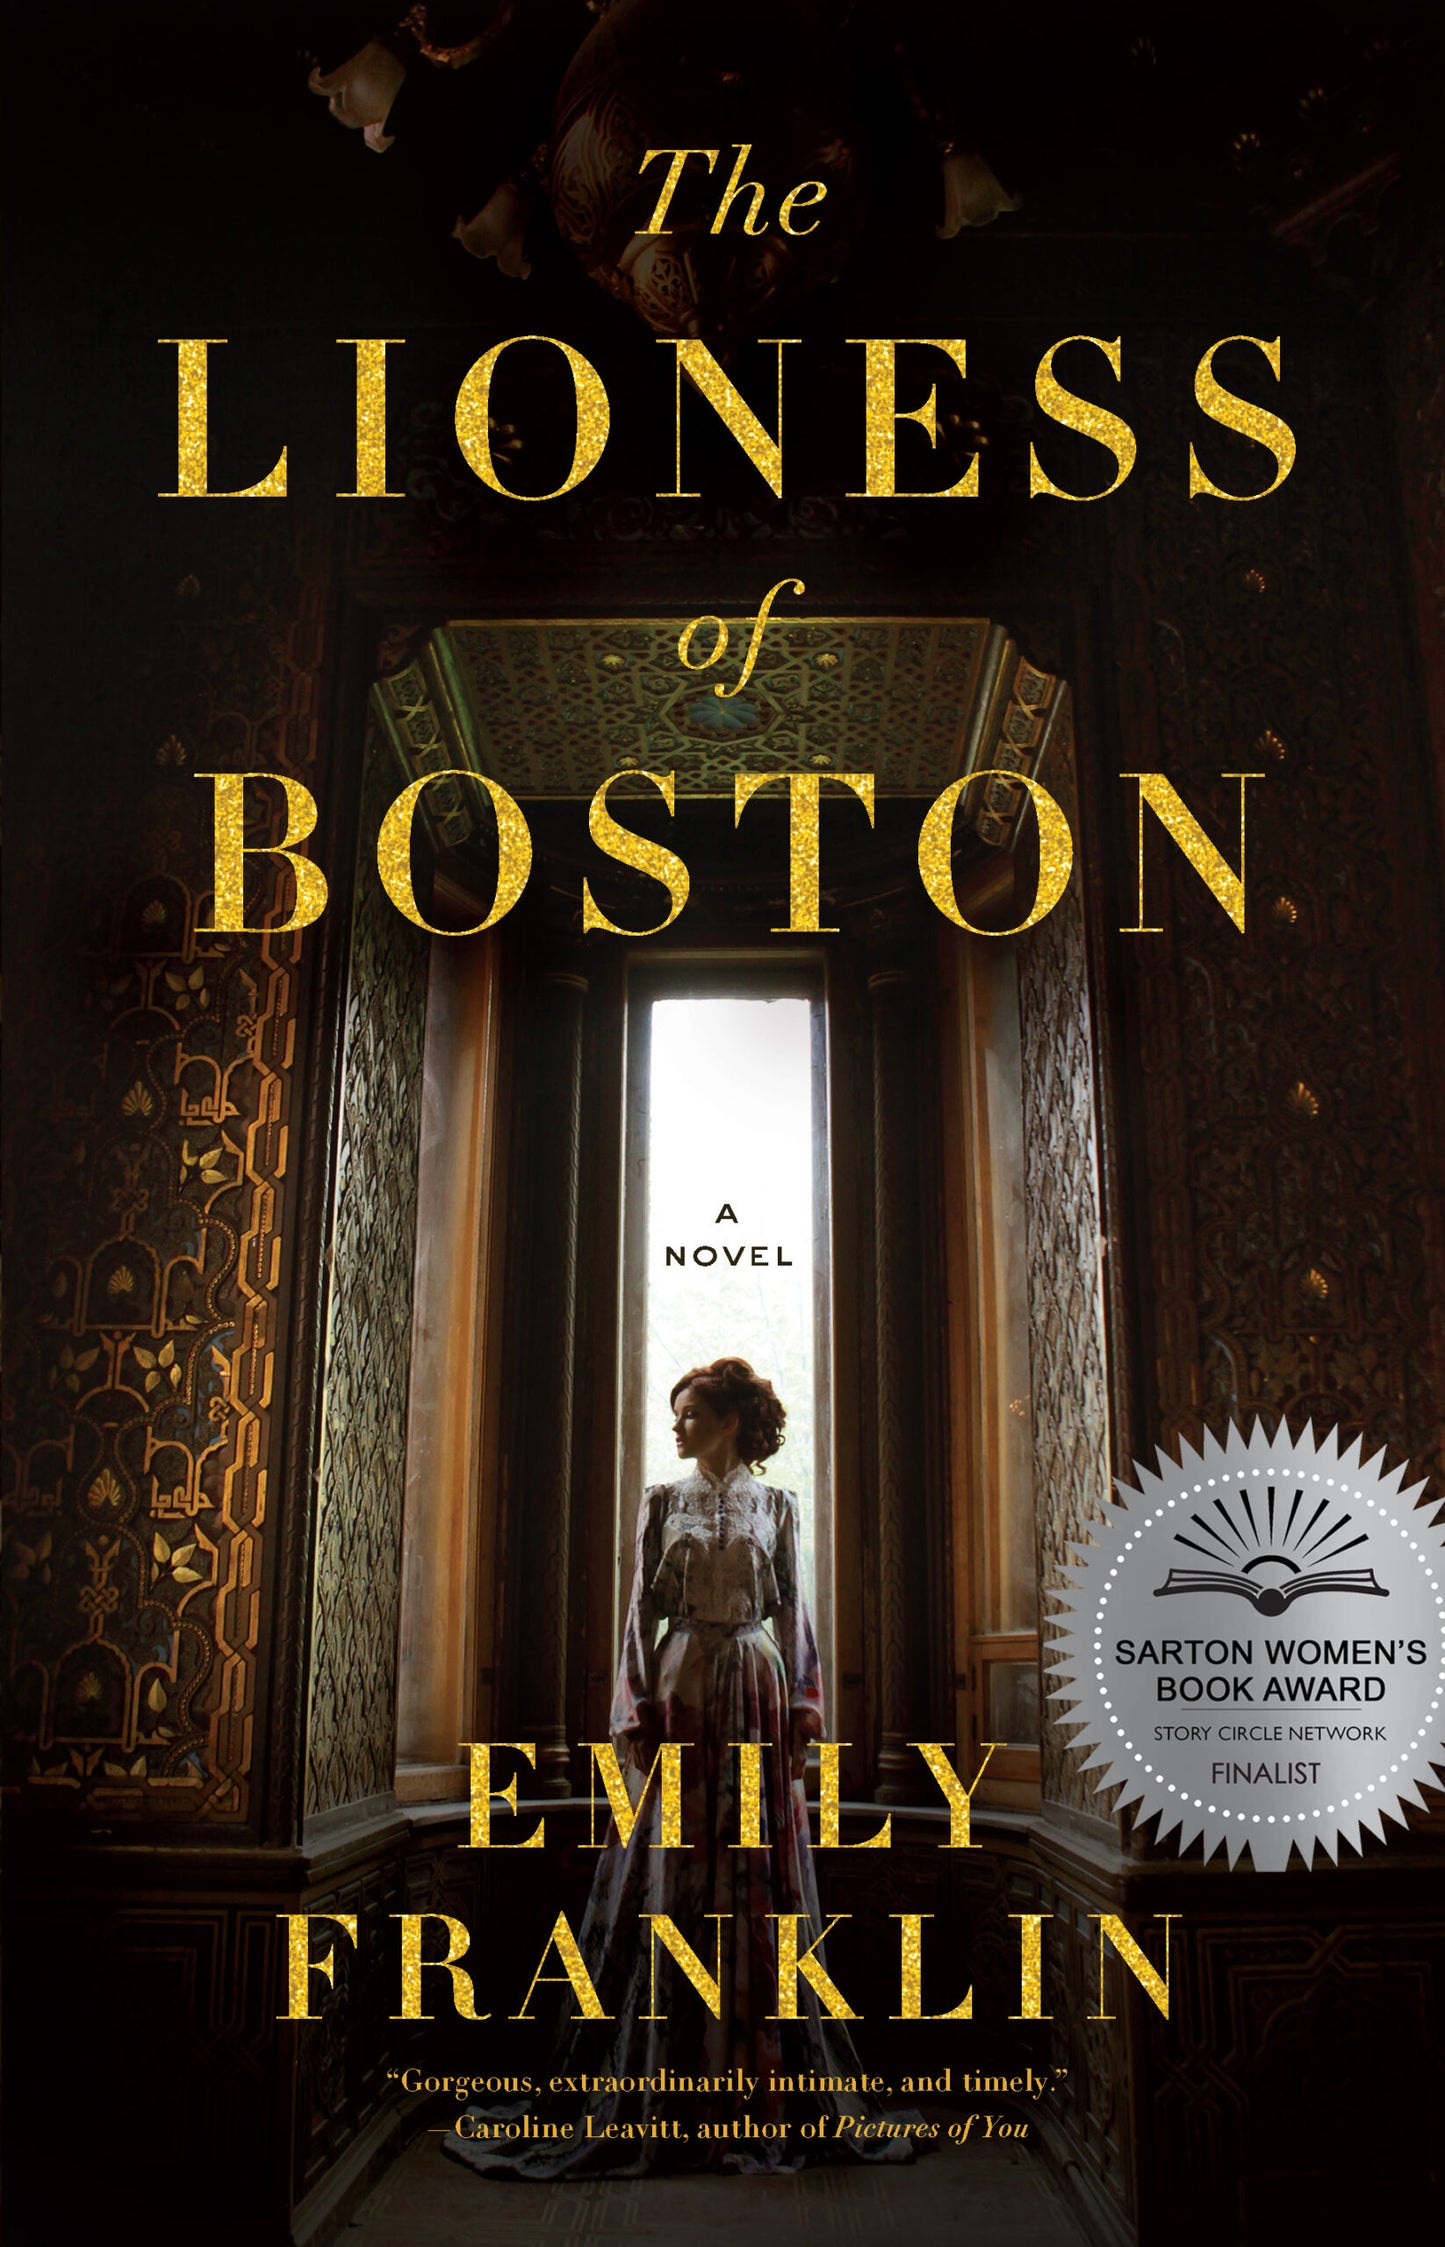 The Lioness of Boston—now in paperback!